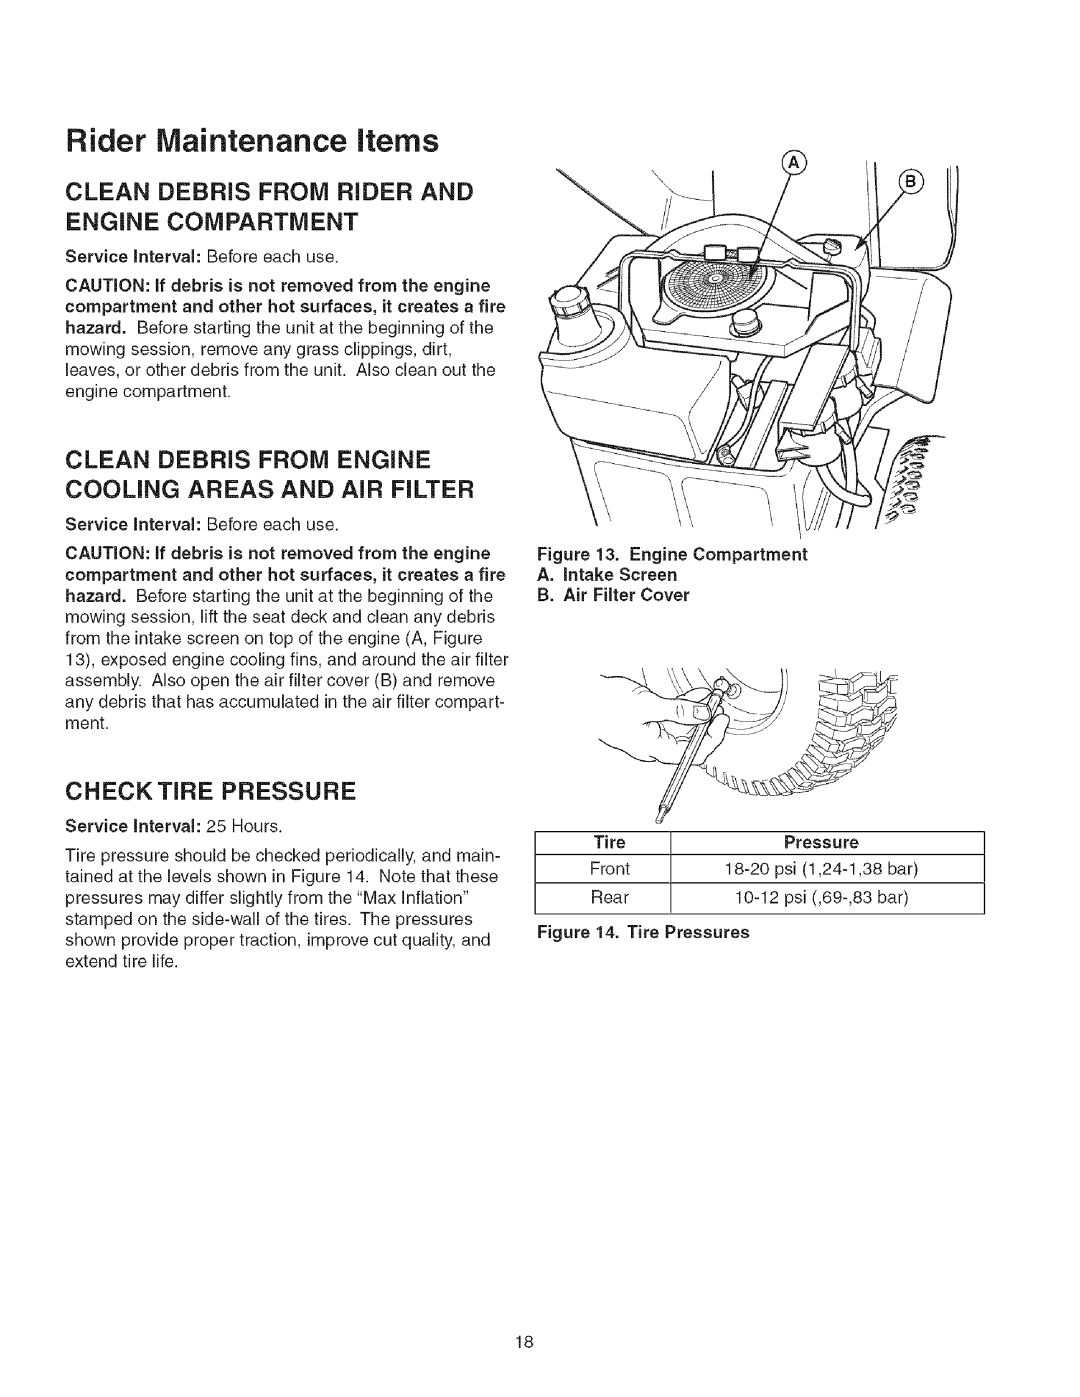 Craftsman 107.2777 manual Rider Maintenance items, Clean Debris From Rider And Engine Compartment, Checktire Pressure 